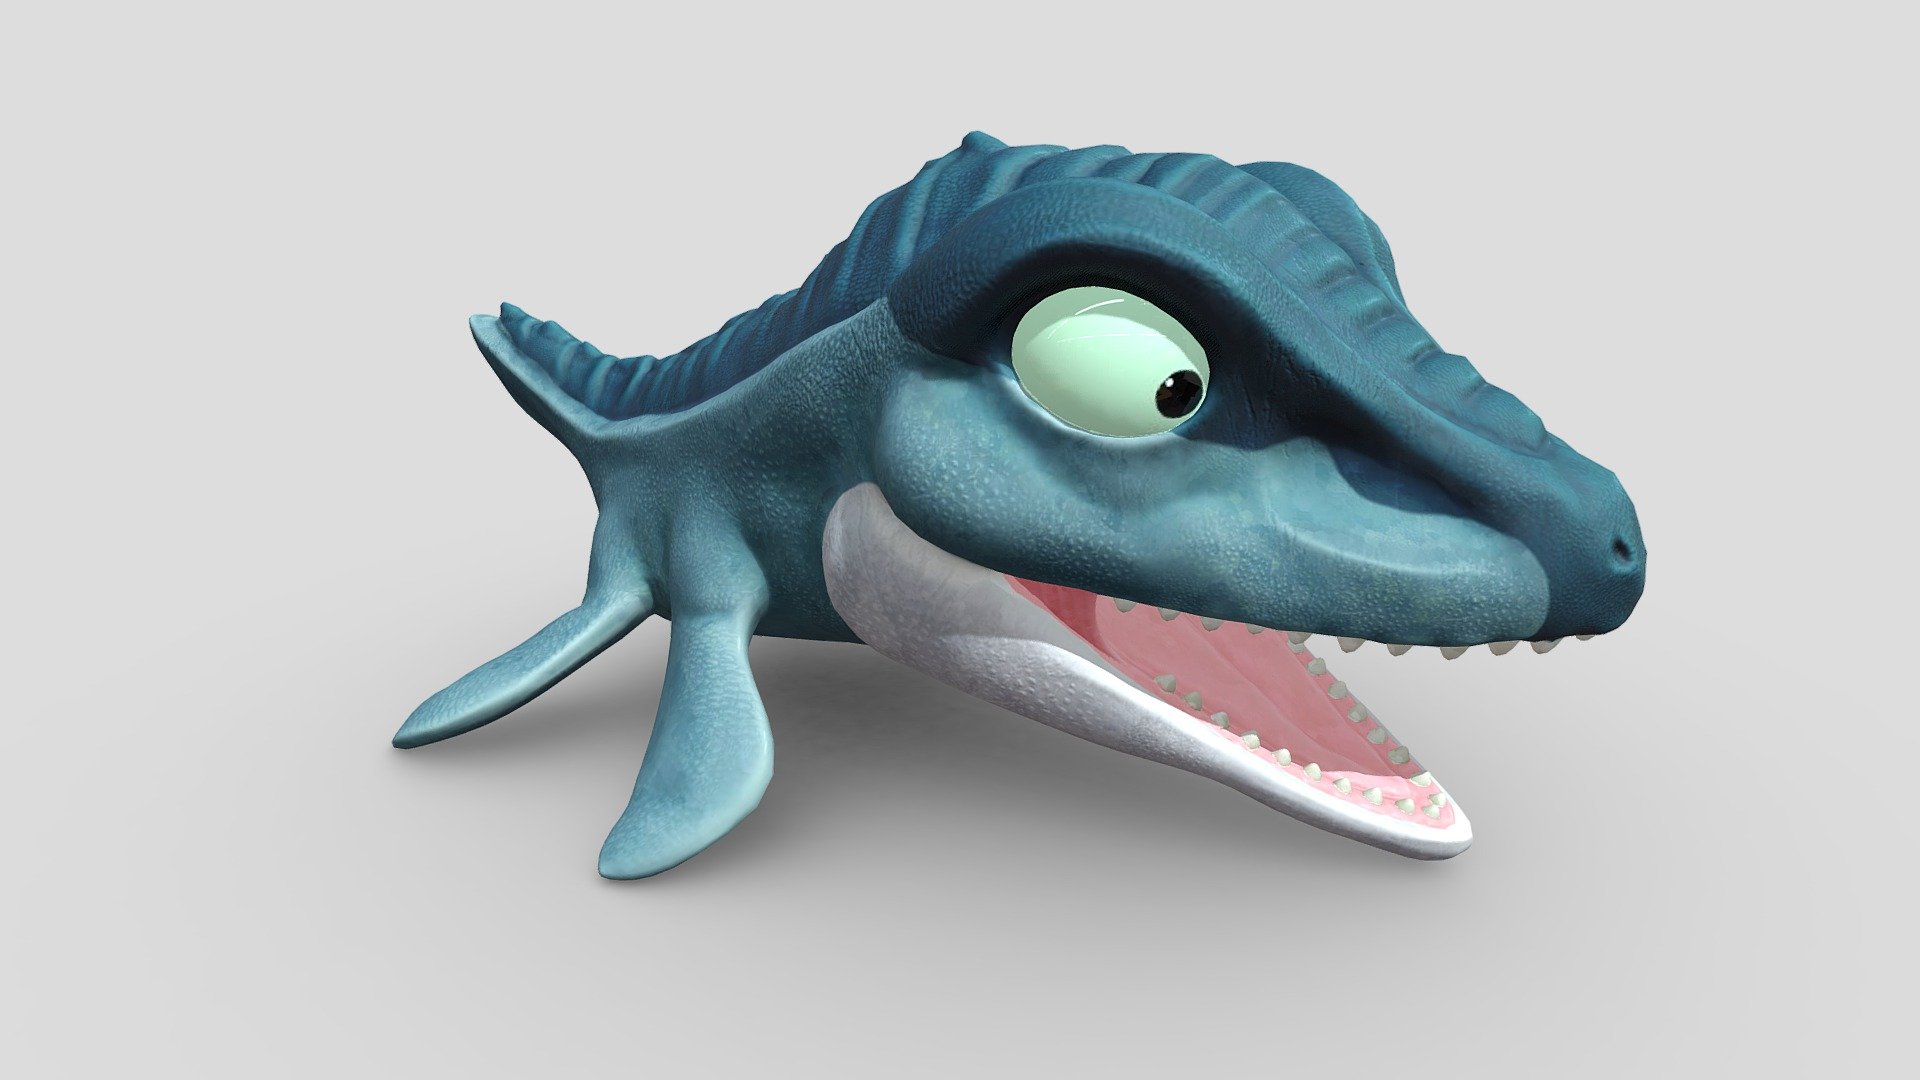 Personal project based on the Snap Squad design series of dinosaurs. Main focus here was to include everything in one texture map and use the multiresolution modifier technique of sculpting within Blender 3d model